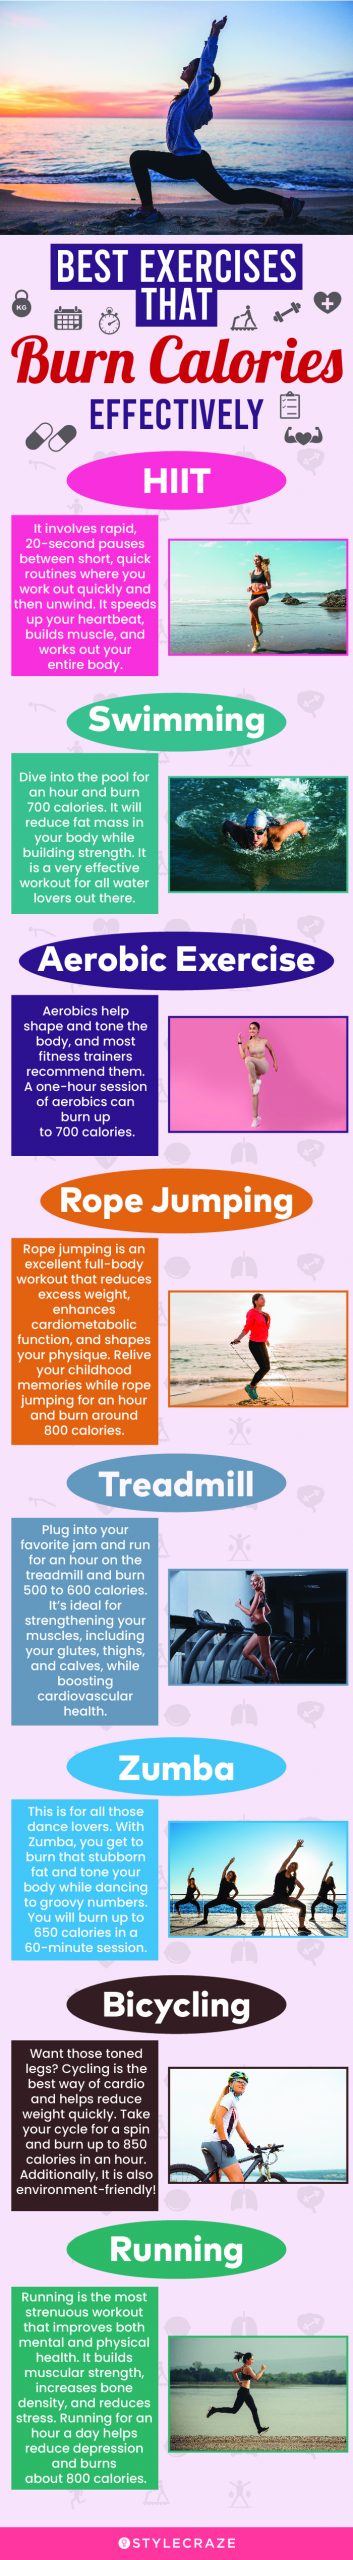 best exercises that burn calories effectively (infographic)